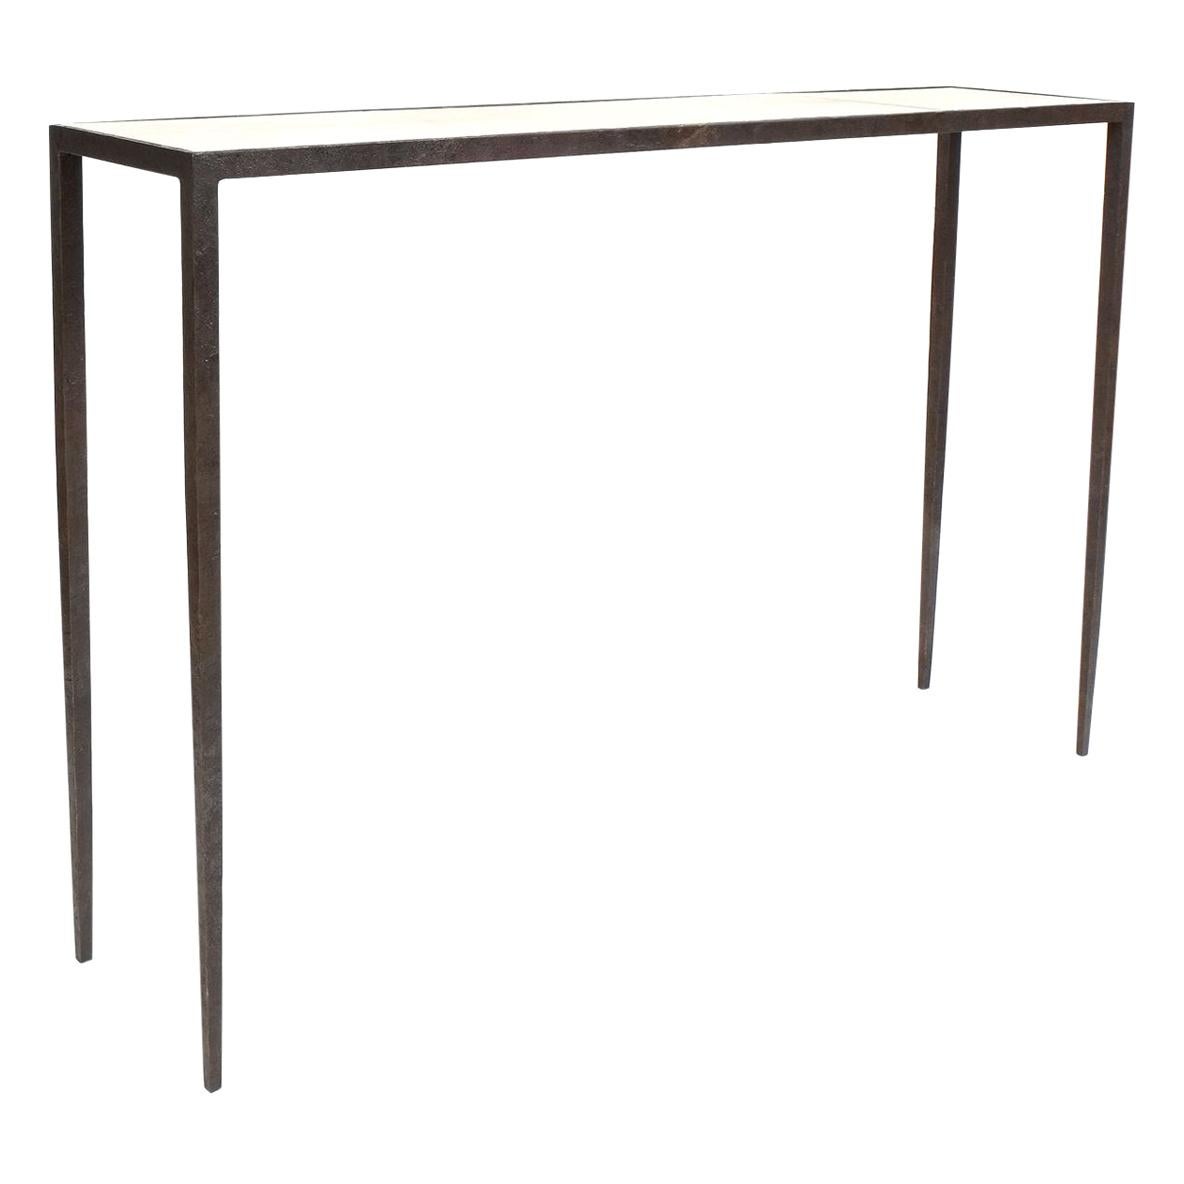 Attributed Jean-Michel Frank Forged Wrought Iron Console Table, France